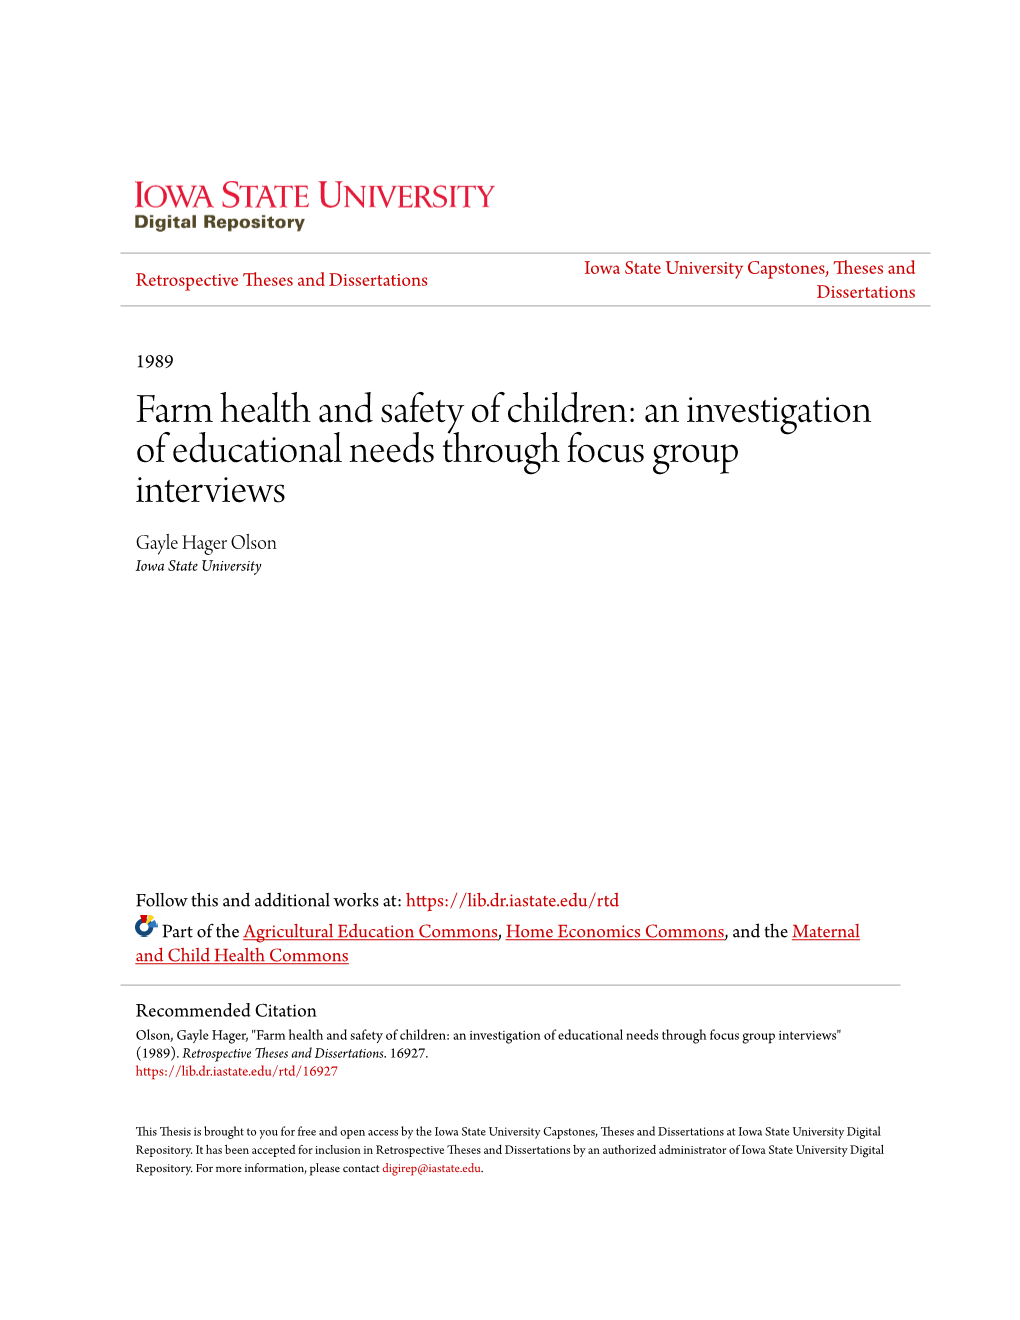 Farm Health and Safety of Children: an Investigation of Educational Needs Through Focus Group Interviews Gayle Hager Olson Iowa State University